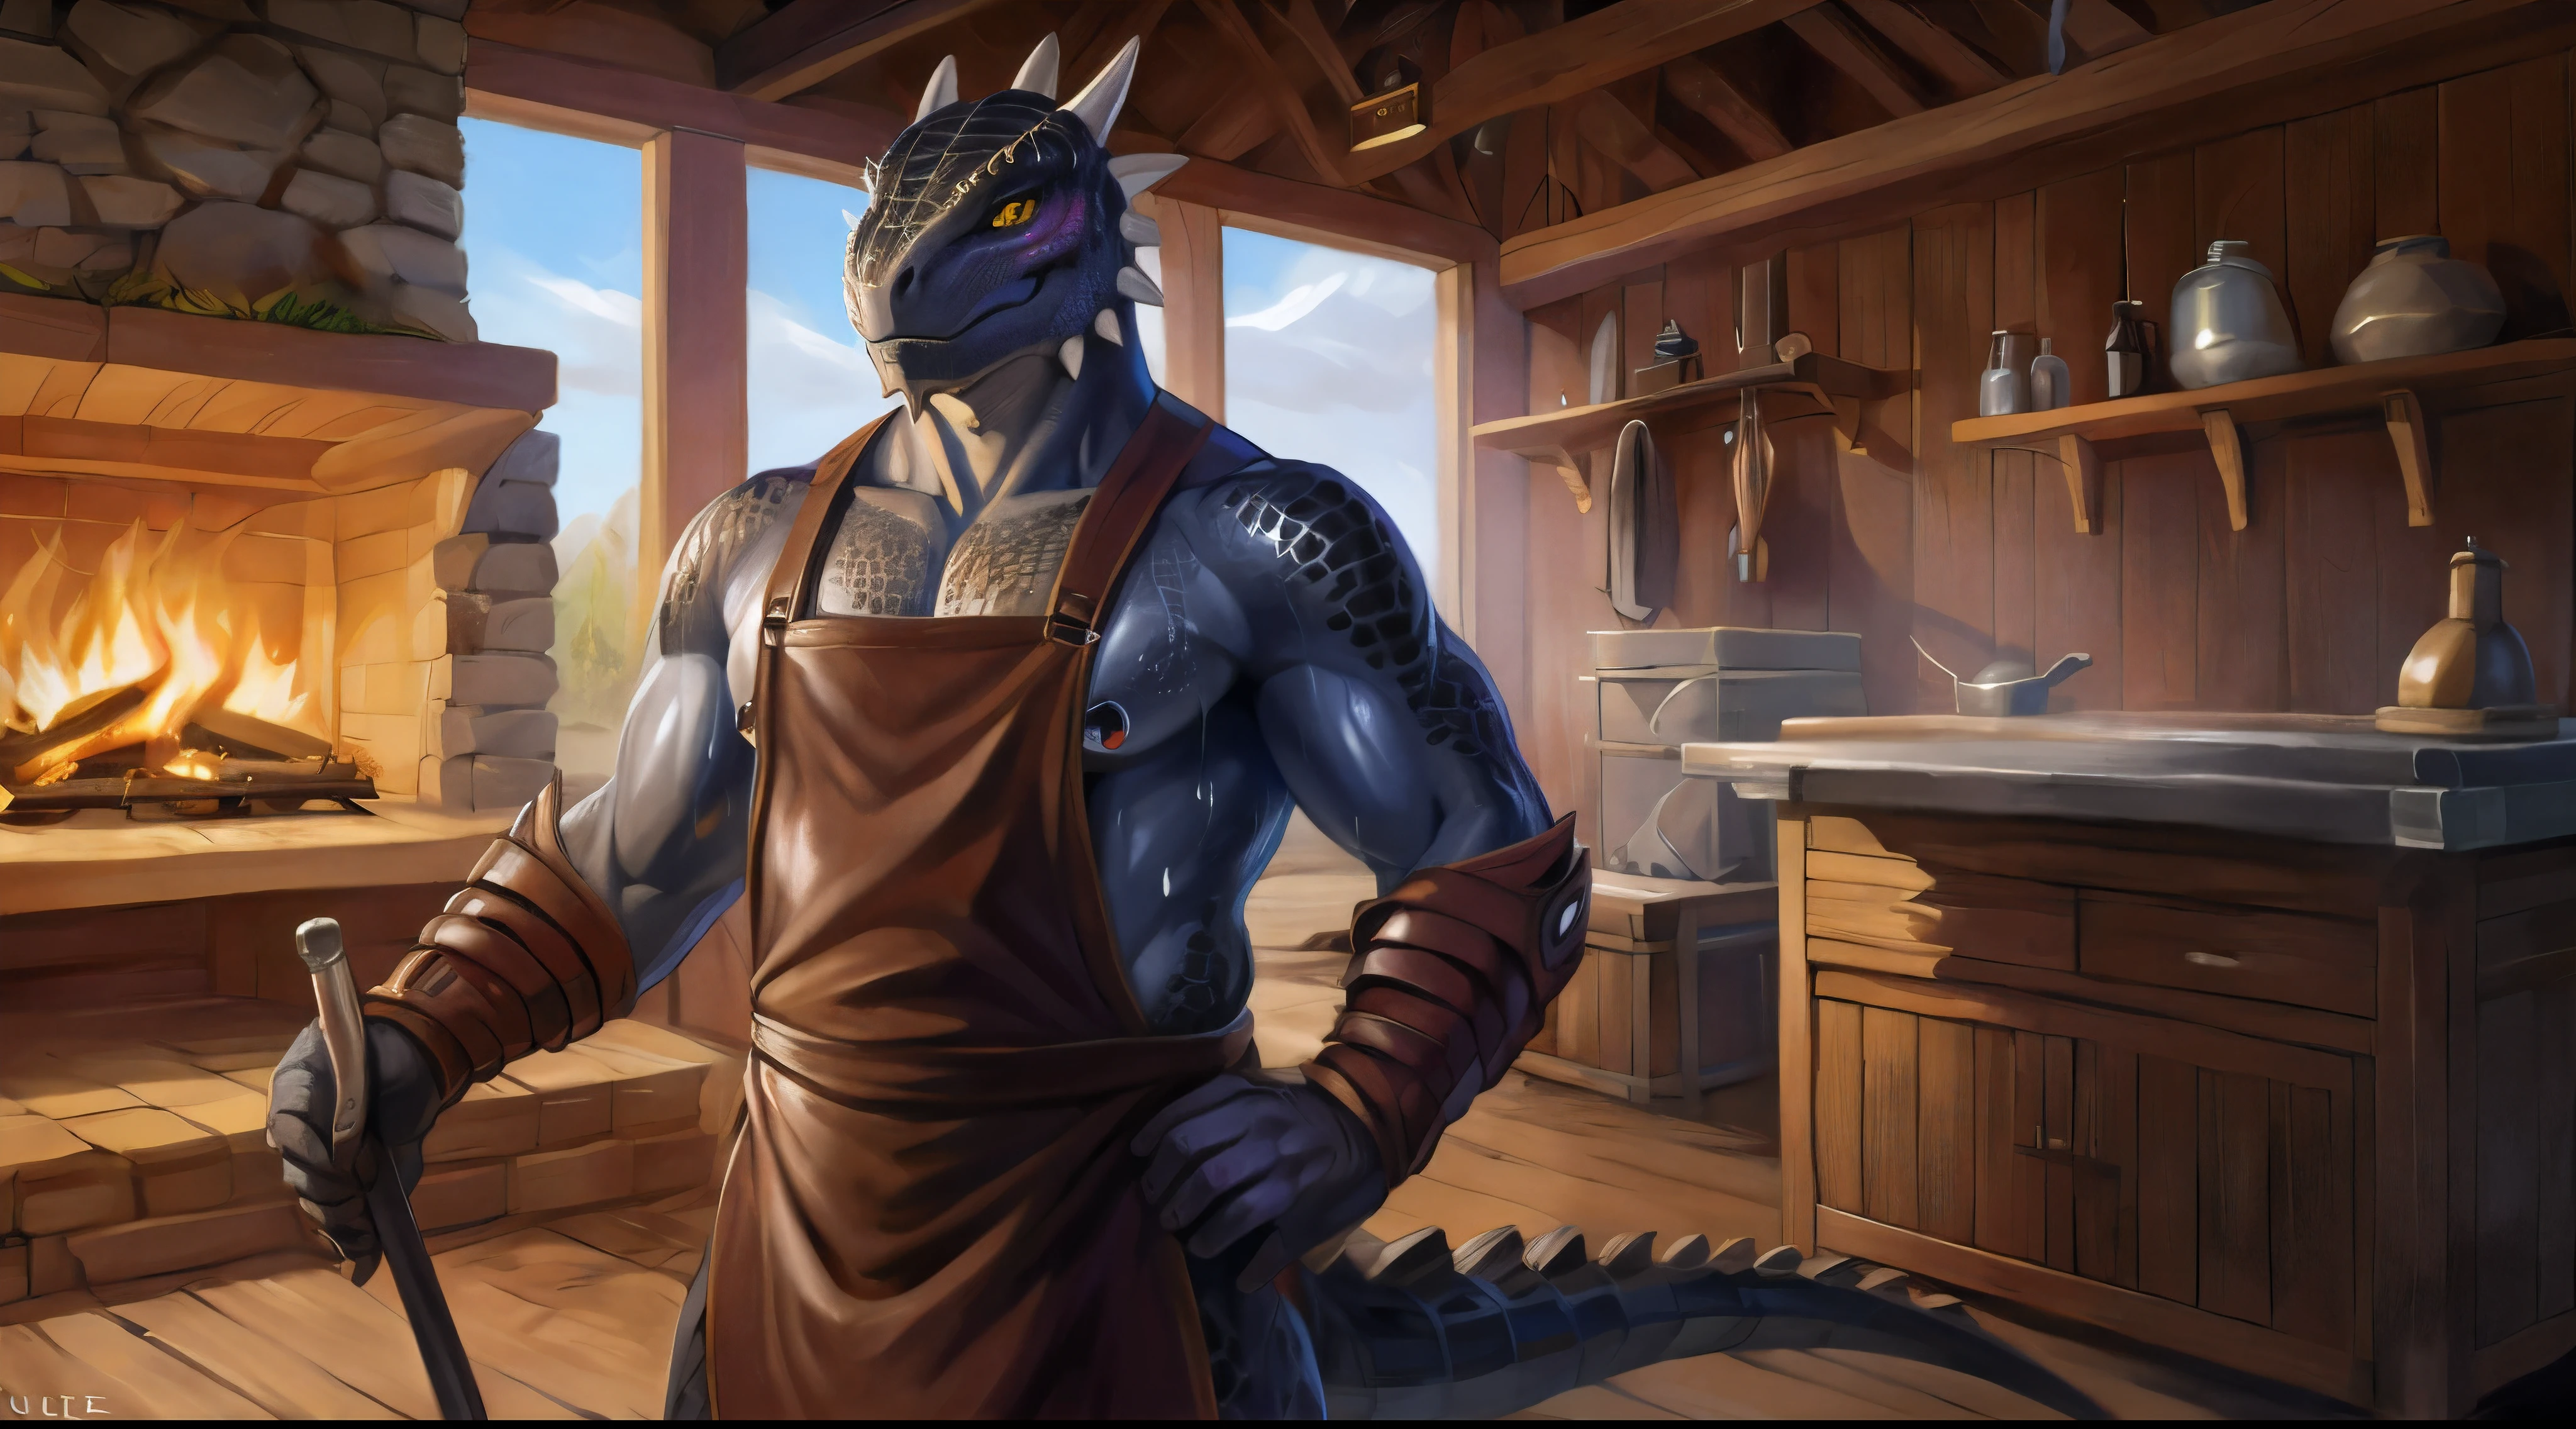 (kemono, by chunie, by narse, by dagasi, by syuro), male, 1boy, argonian, black scales, shine eyes, handsome face, blacksmith, day, dim, detailed eyes, fat, musclegut, detailed clothing, ((dark brown leather blacksmith's apron)), sweat, musk, (old, dad, daddy, old man, 50-year-old middle-aged man, an old argonian blacksmith who forges a weapon), tall, huge bulge, ((sweat)), ((musk)), pecs, detailed nipple piercings, masterpiecedetailed body, detailed scales, (detailed eyes), (detailed hands), Highest Quality, 4k, masterpiece, Amazing Details, Shallow Depth of Field, (masutepiece, Best Quality, Clear image quality, hight resolution,４K image quality), background: a forge, a smithy, fire, charcoal, anvil, weapons rack, armors rack, topless